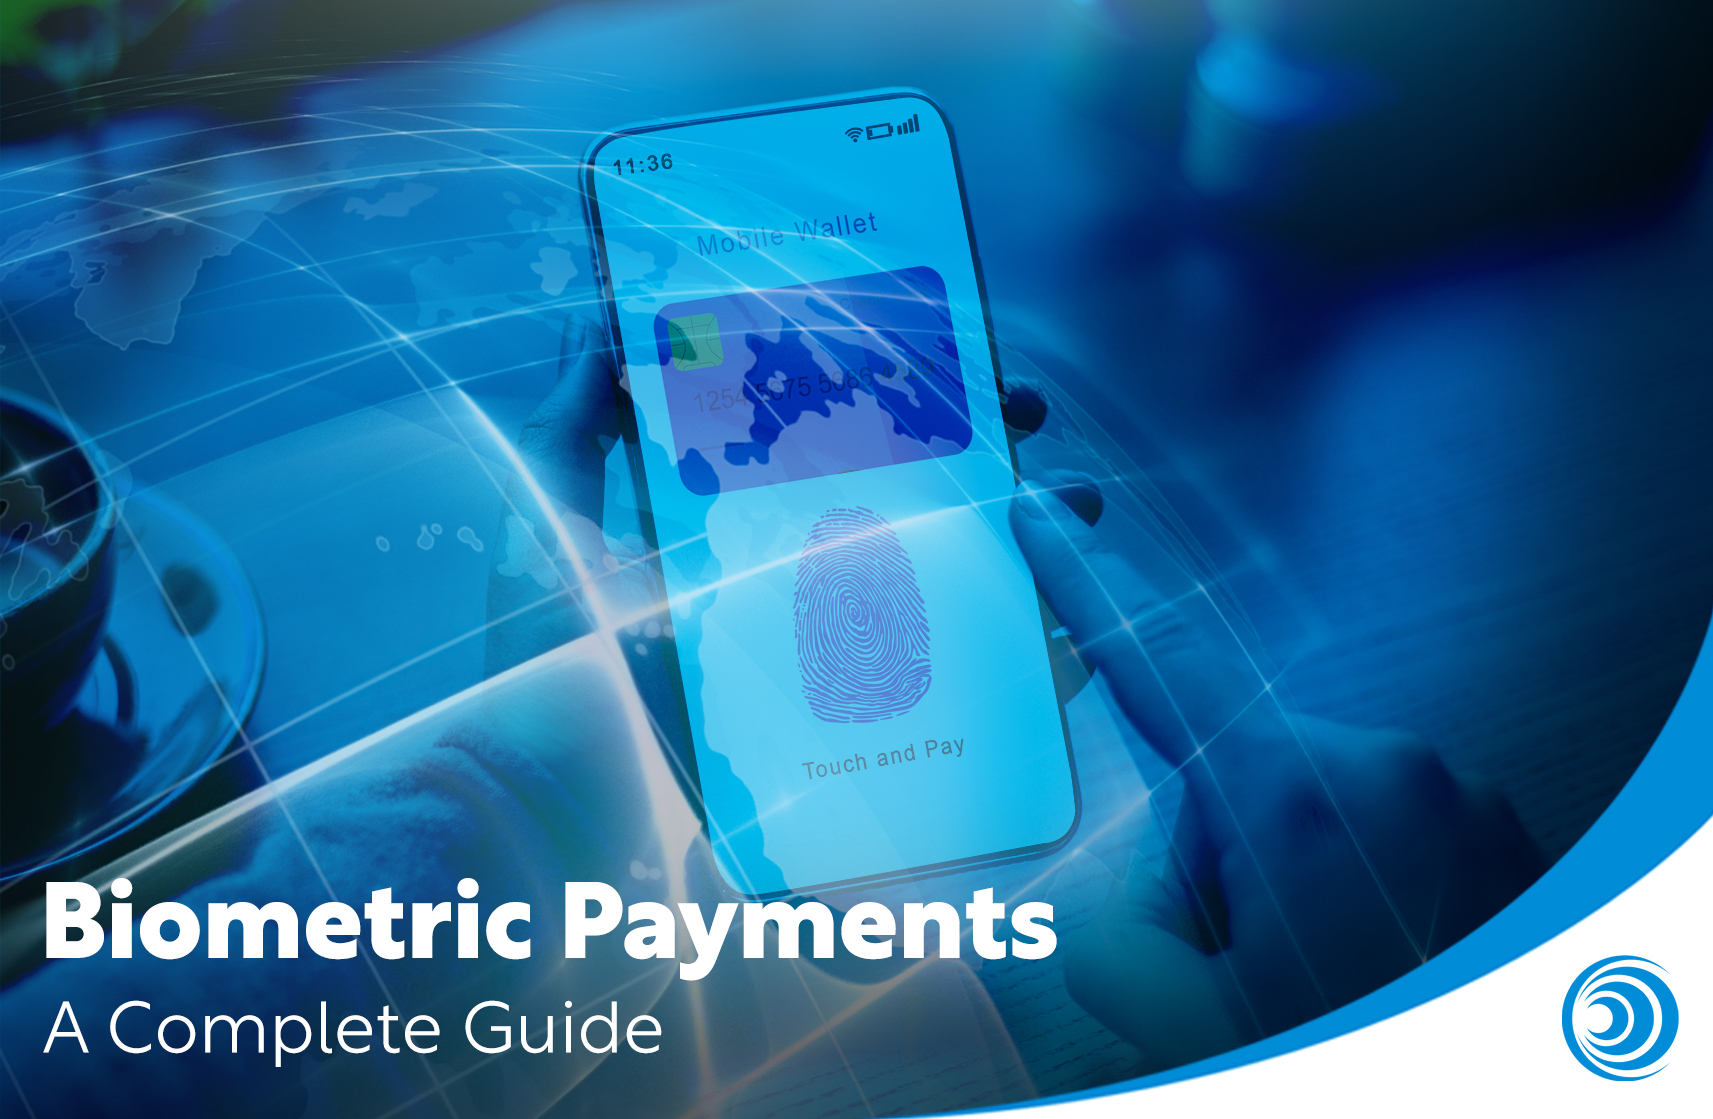 A Guide to Biometric Payments